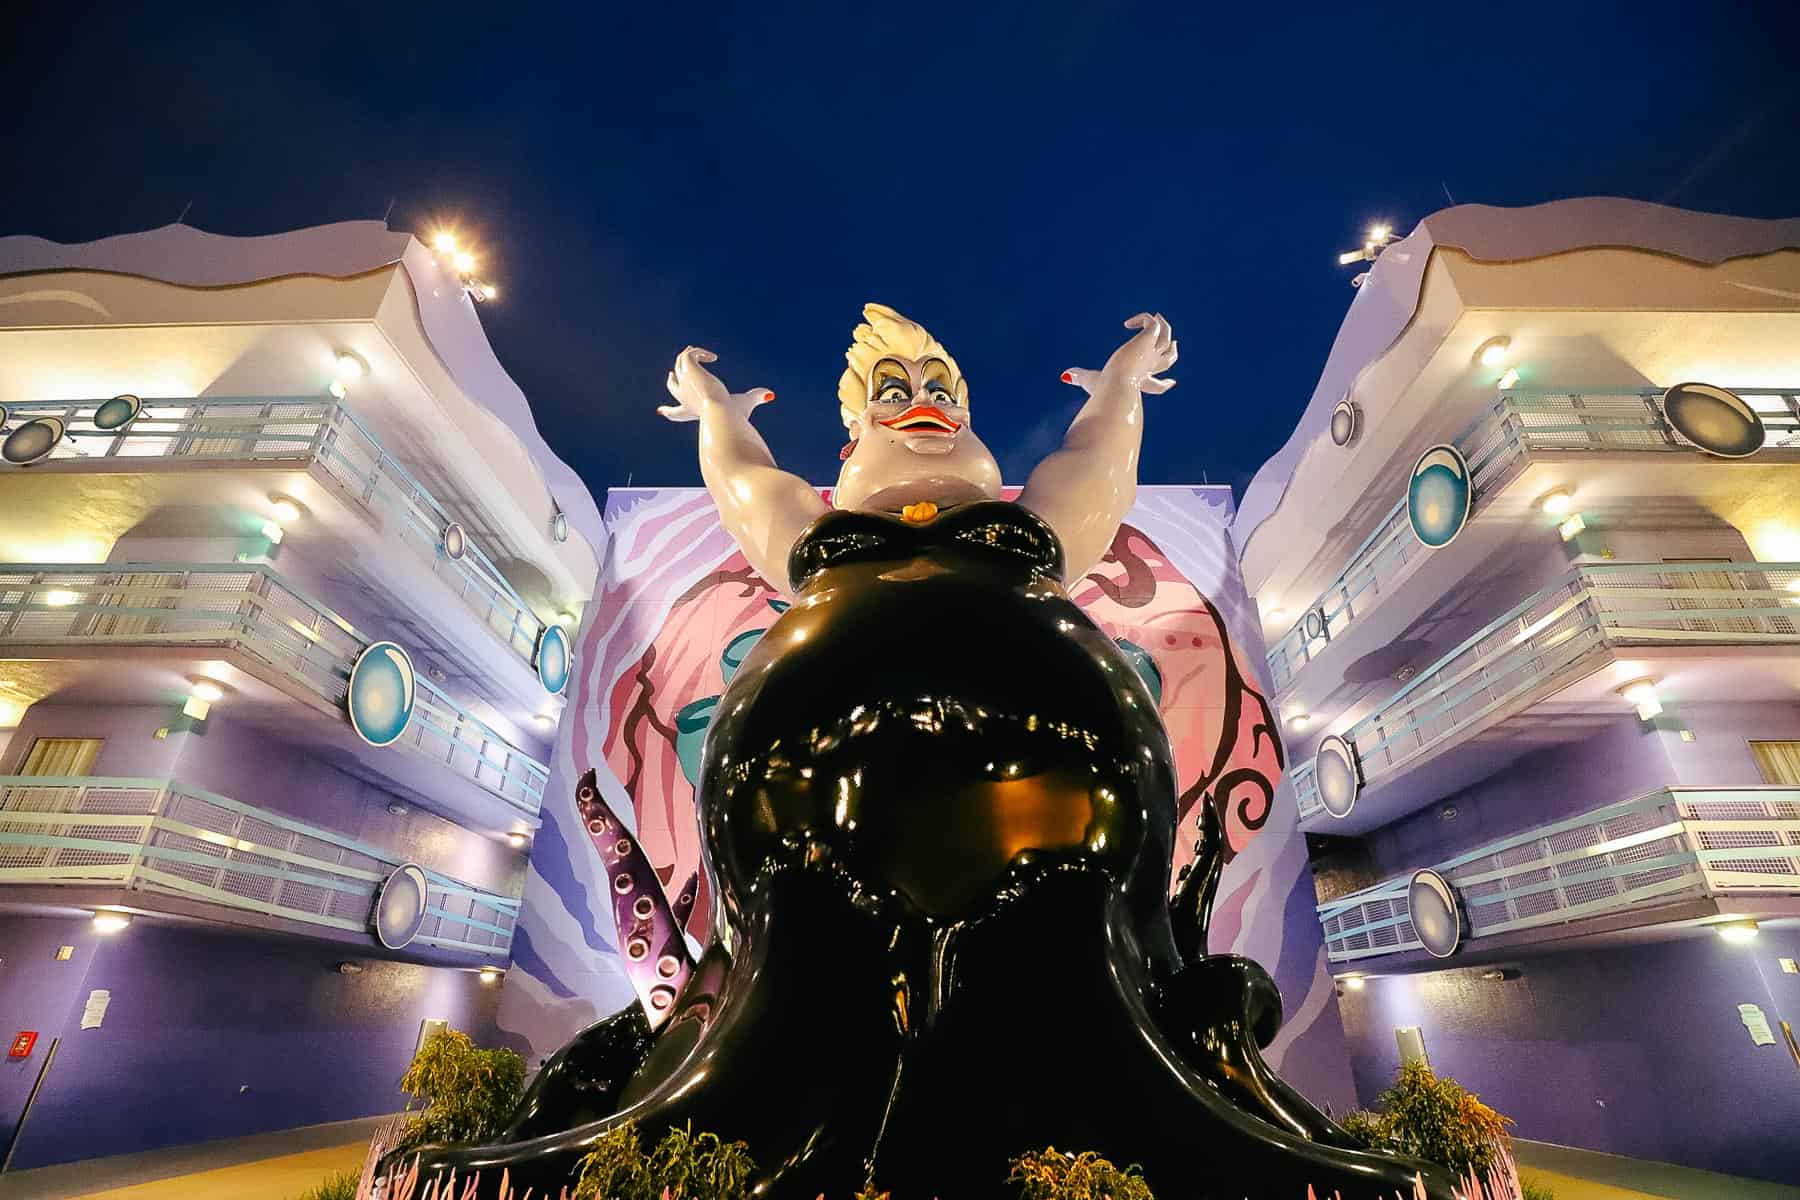 Ursula's courtyard in the Little Mermaid section of Art of Animation